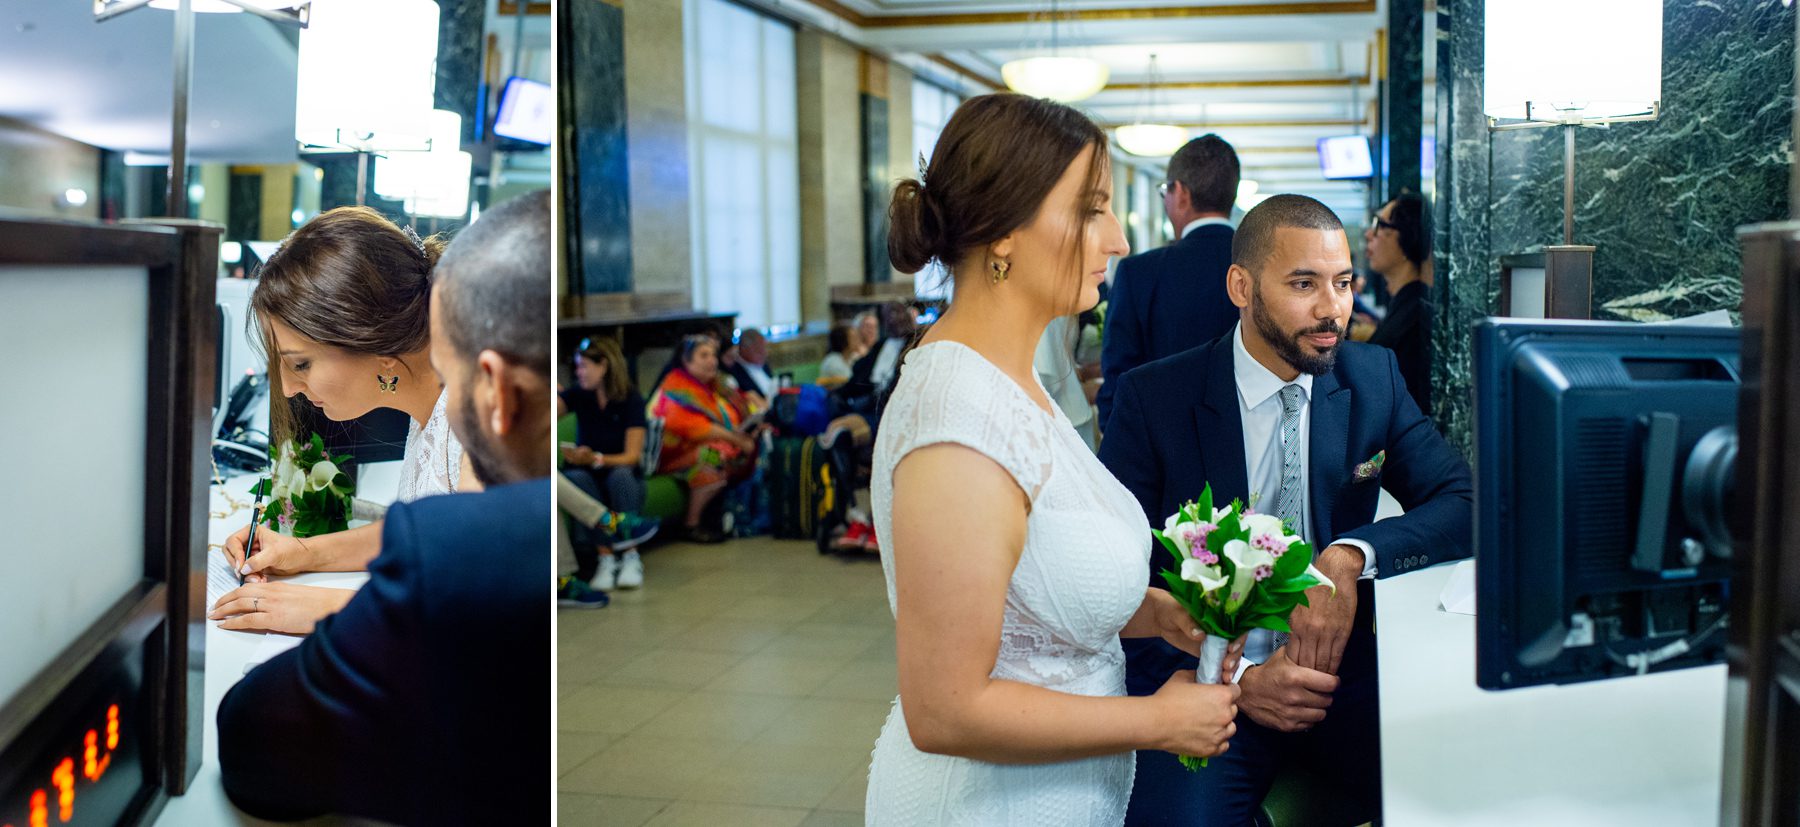 Getting Married at City Hall in NYC